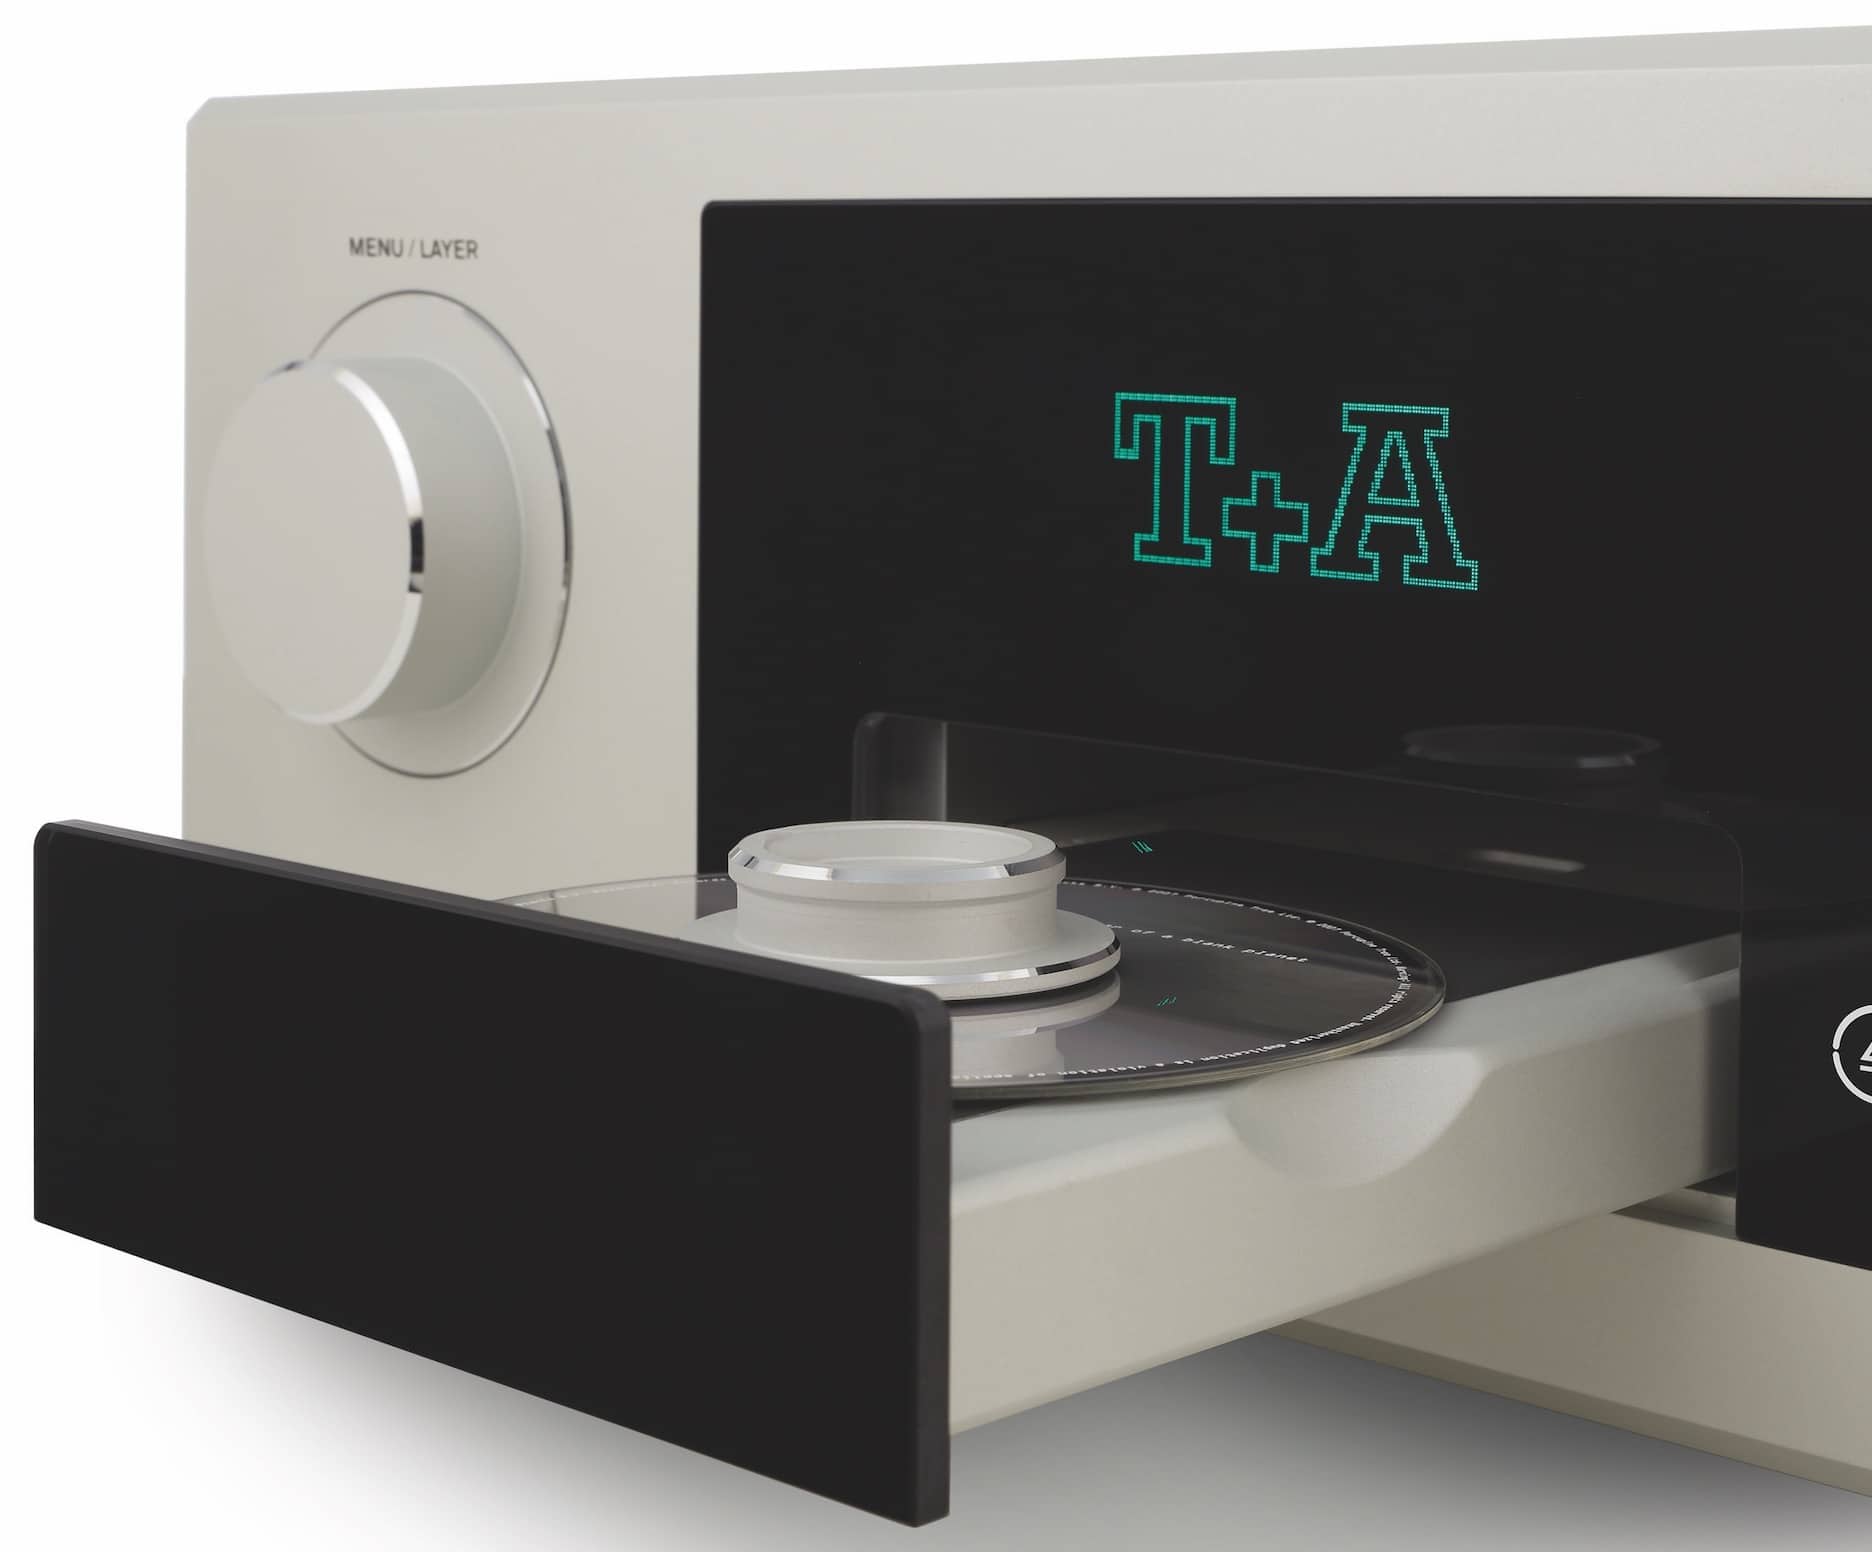 HV DAC/Streamer Plus transport From T+A